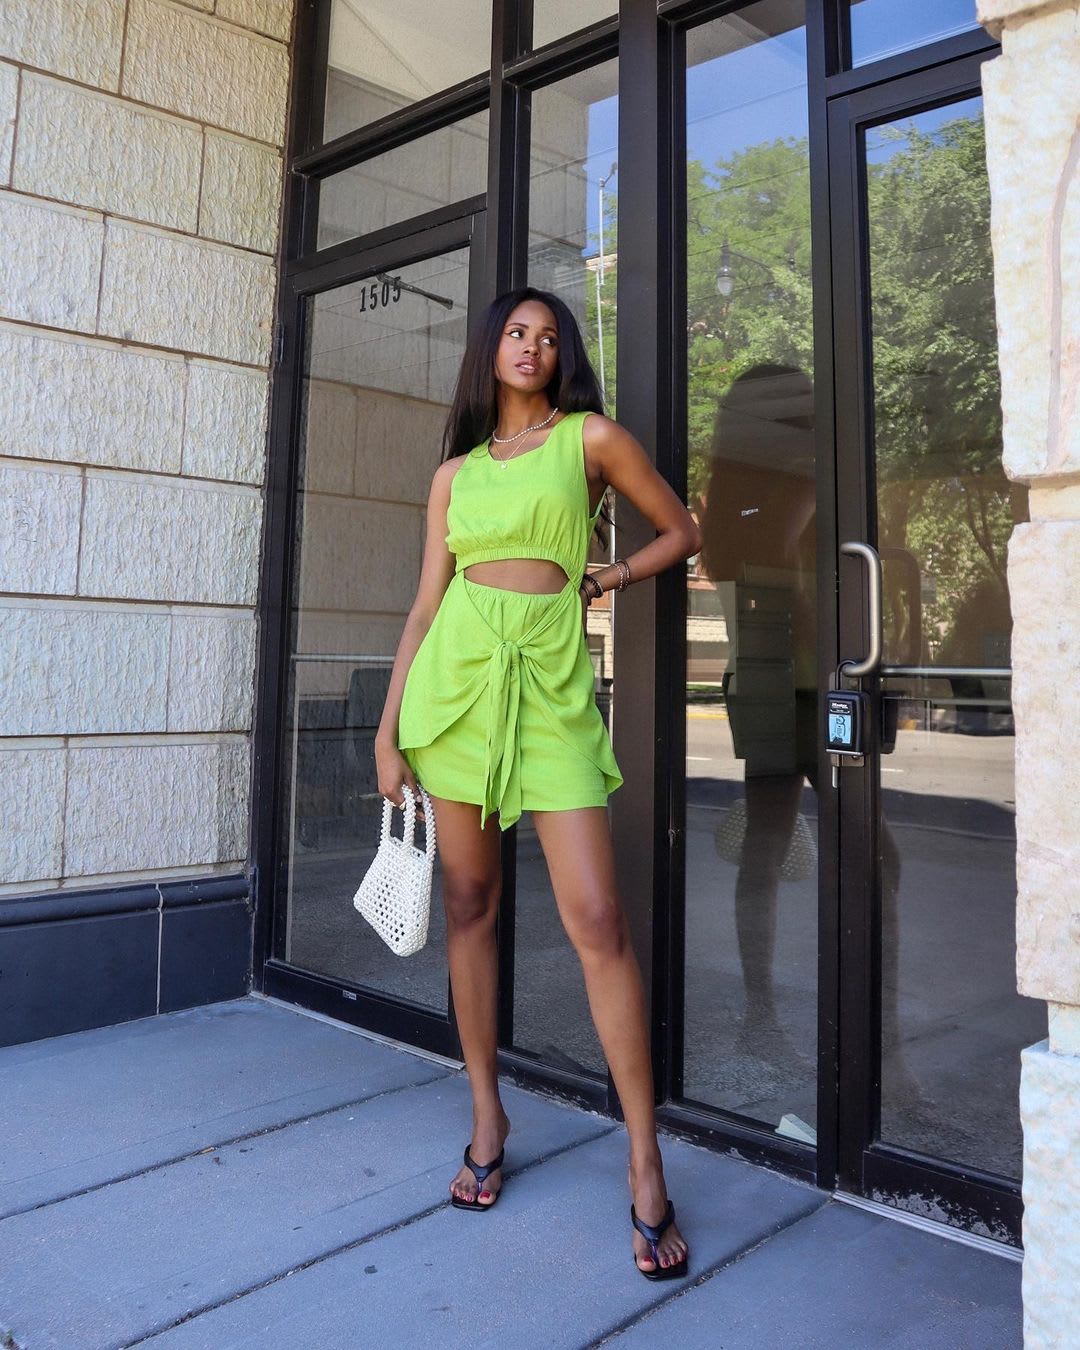 18 Summer Outfits To Copy Next Date Night - Lulus.com Fashion Blog